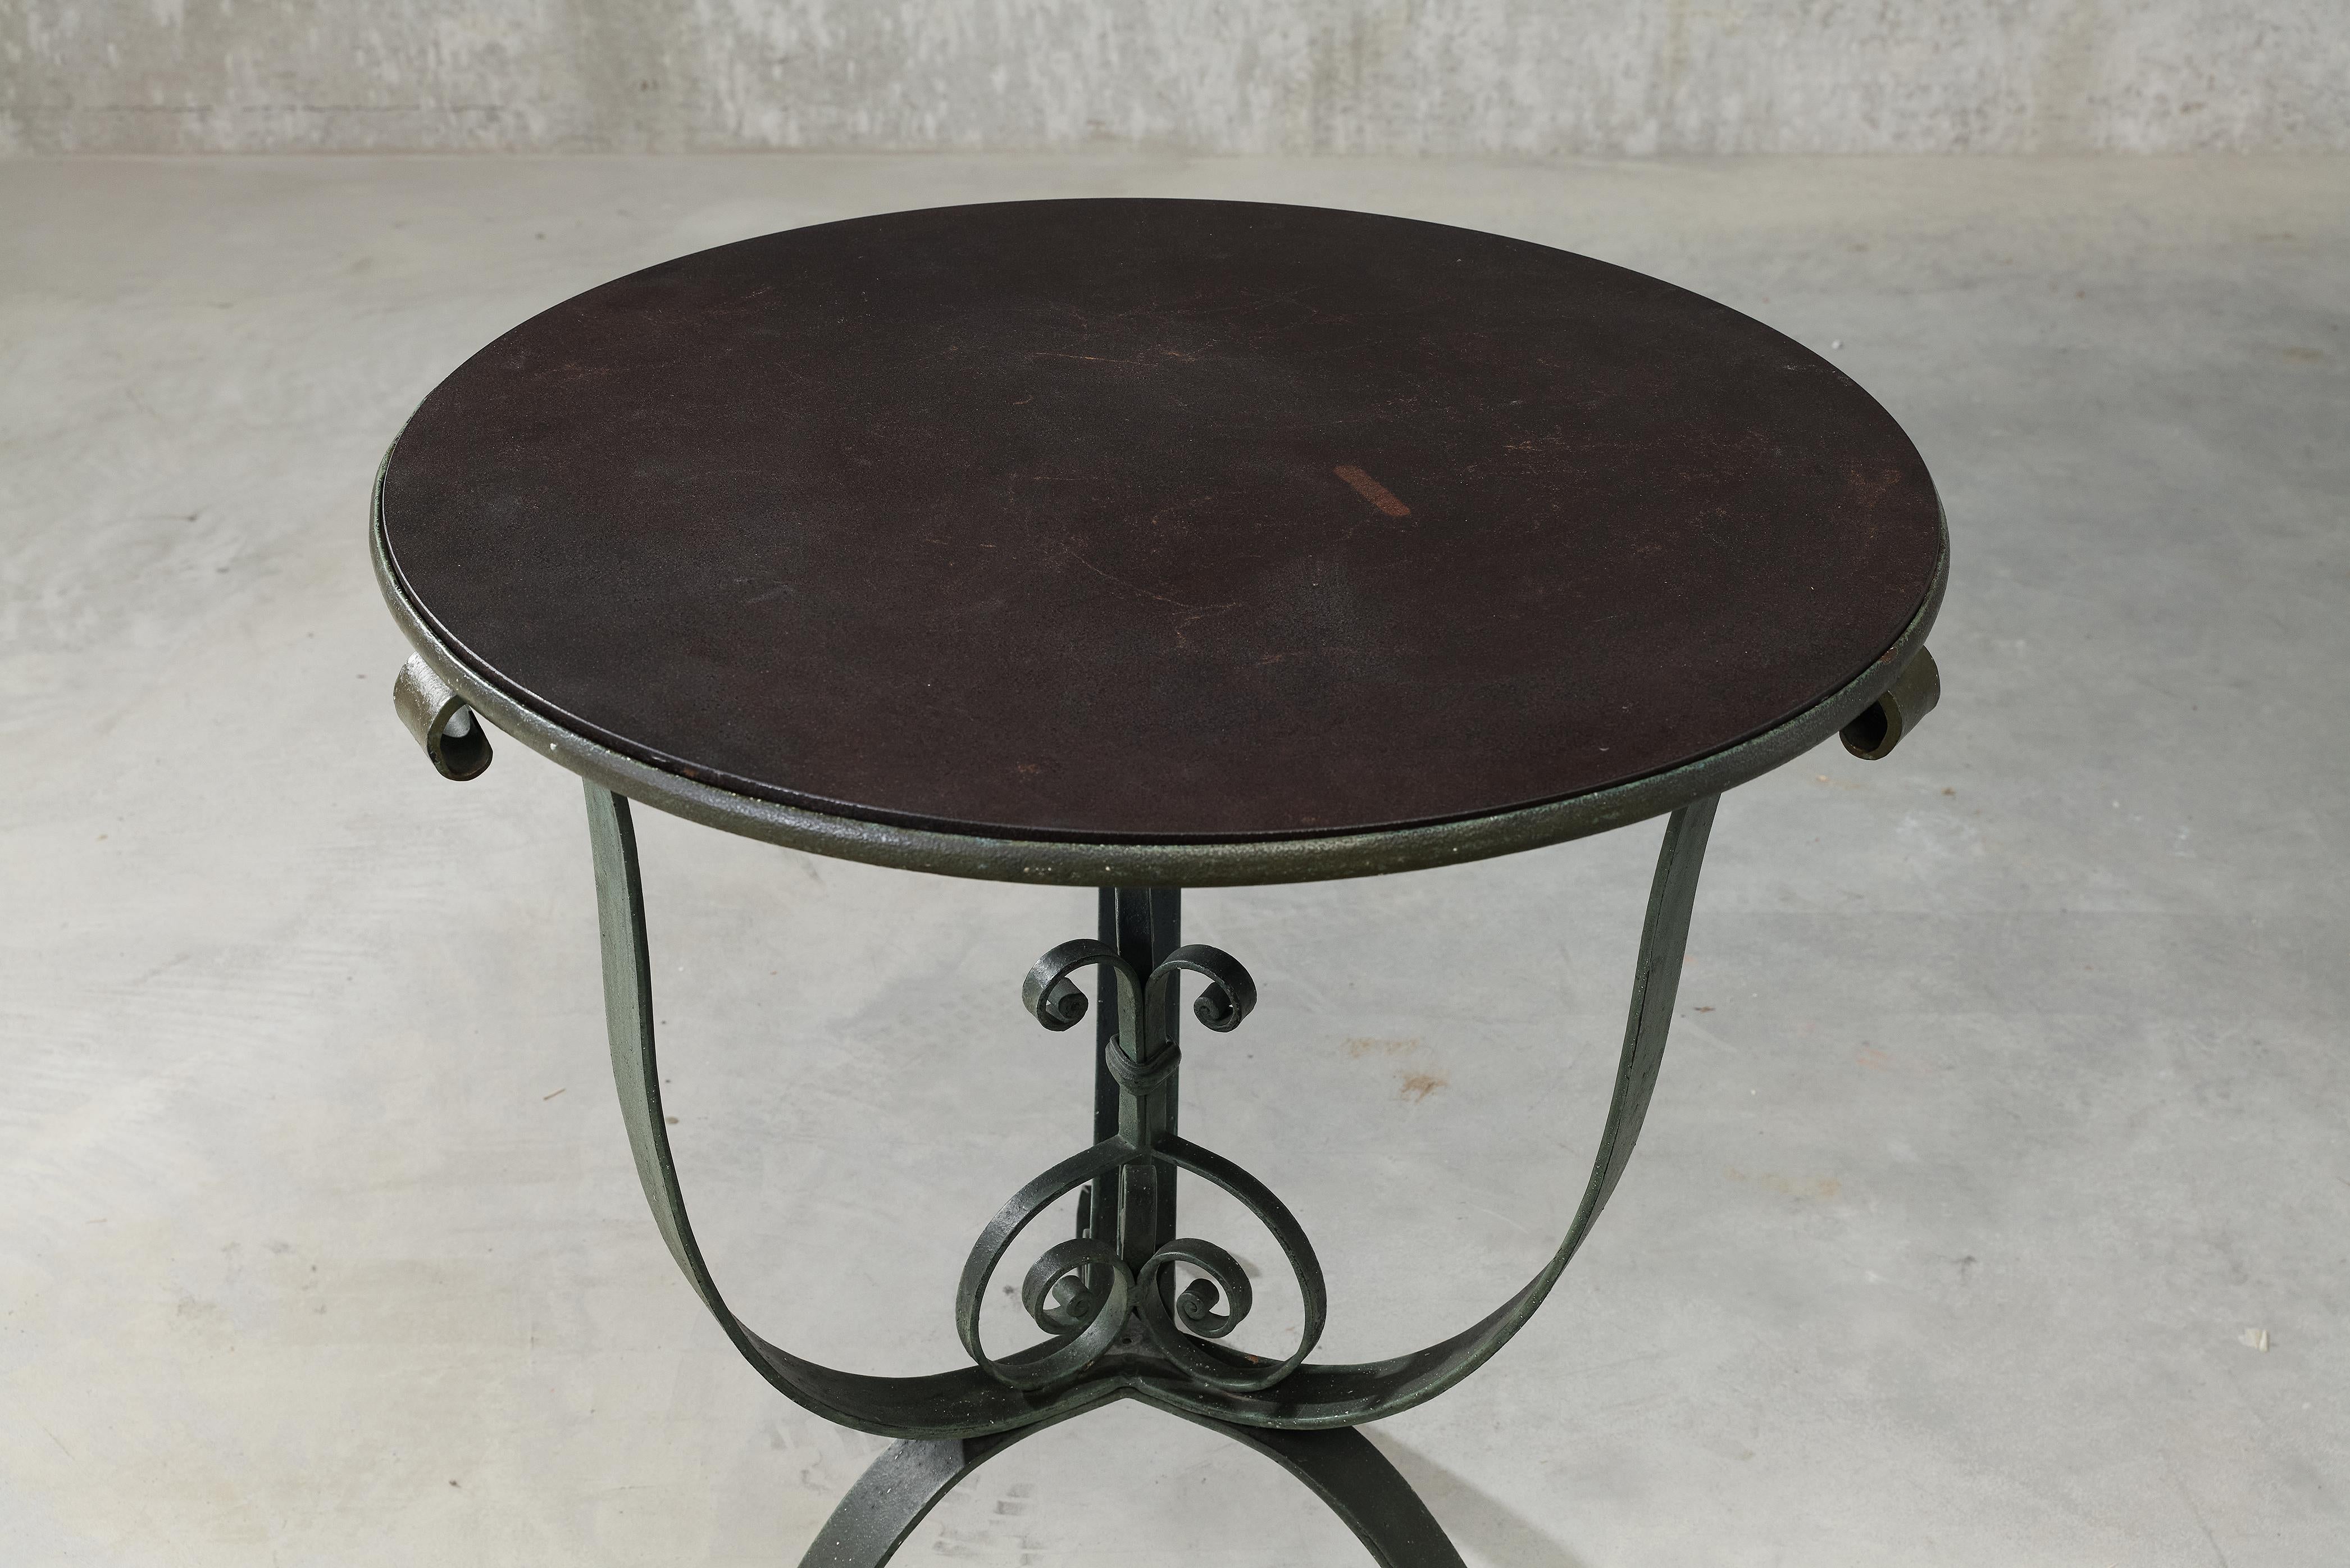 A French Art Deco style Green Patinated Wrought Iron Table (1920s-1930s) In Good Condition For Sale In AMSTERDAM, NL